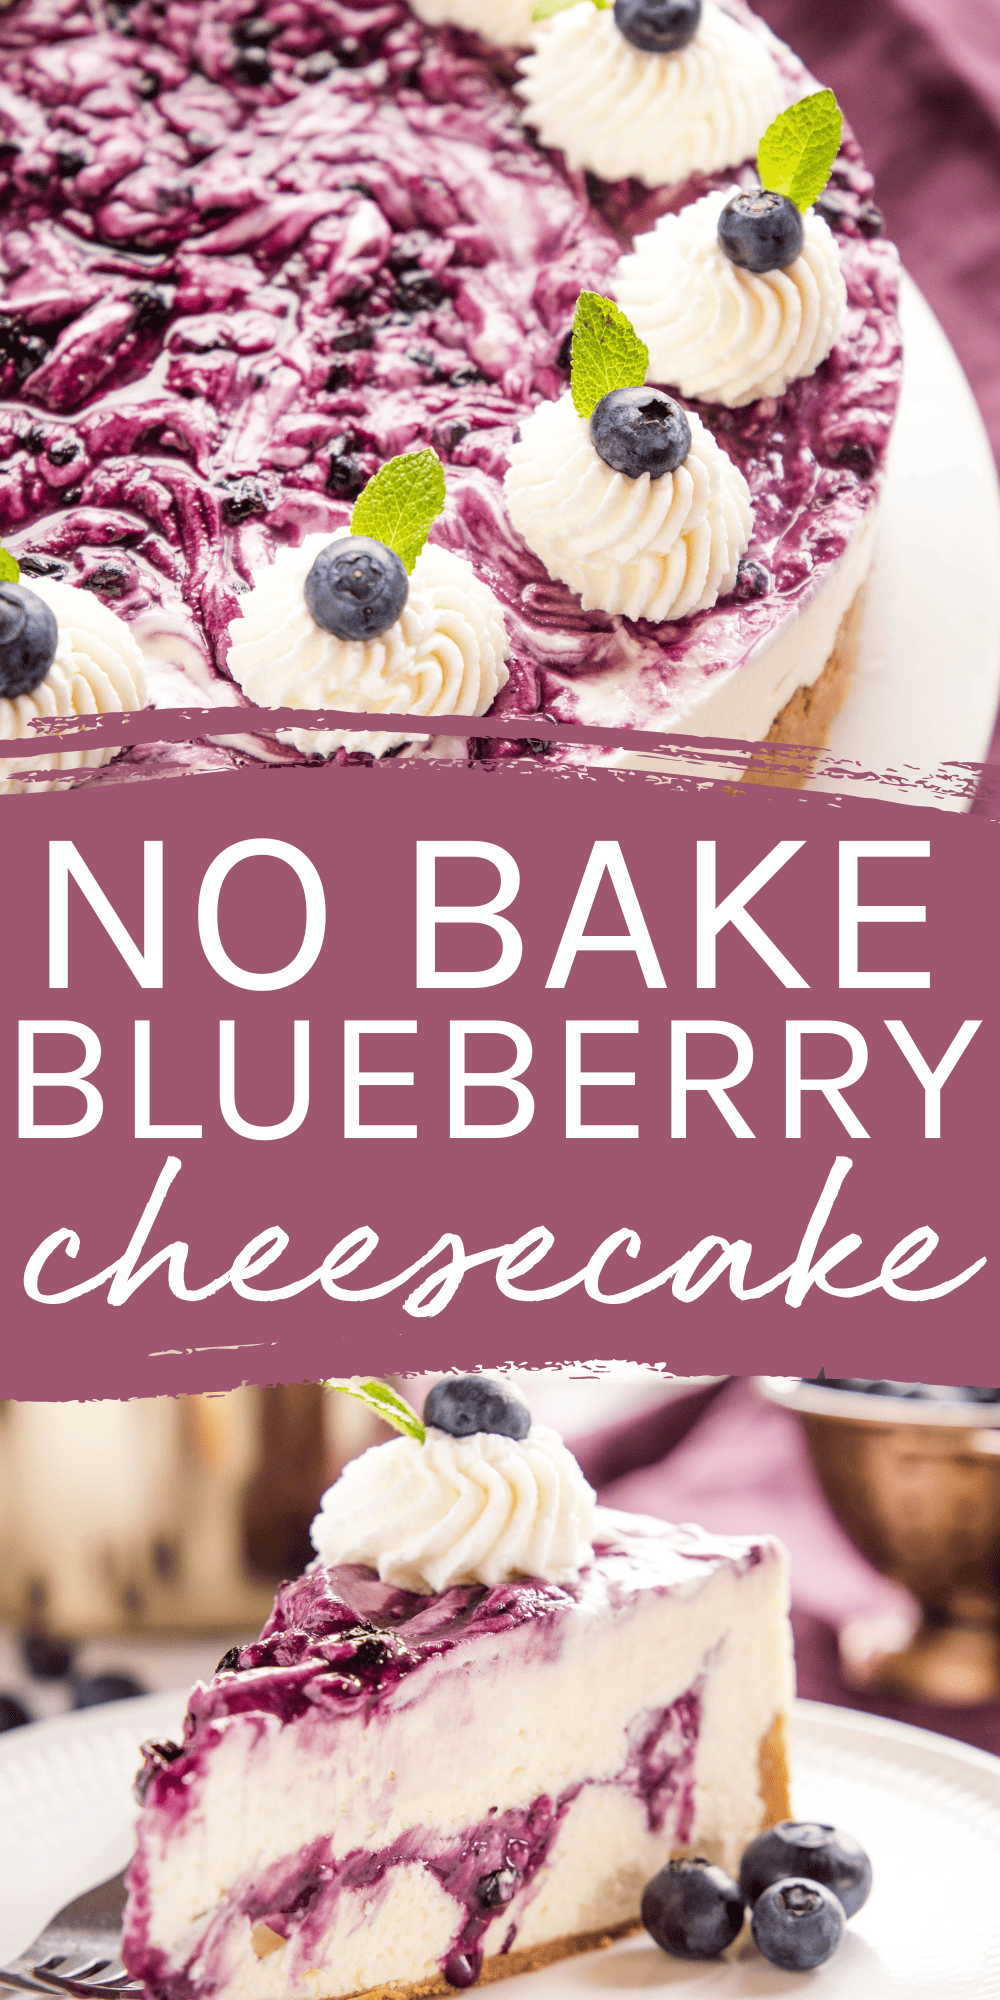 This No Bake Blueberry Cheesecake recipe is a stunning and simple summer dessert made easy with only a few simple ingredients. Ultra creamy, smooth and flavoured with sweet blueberry sauce - no baking required! Recipe from thebusybaker.ca! #blueberrycheesecake #nobakecheesecake #nobakeblueberrycheesecake #berrycheesecake #easycheesecake #cheesecakerecipe #dessertrecipe #easydessert #nobakedessert via @busybakerblog